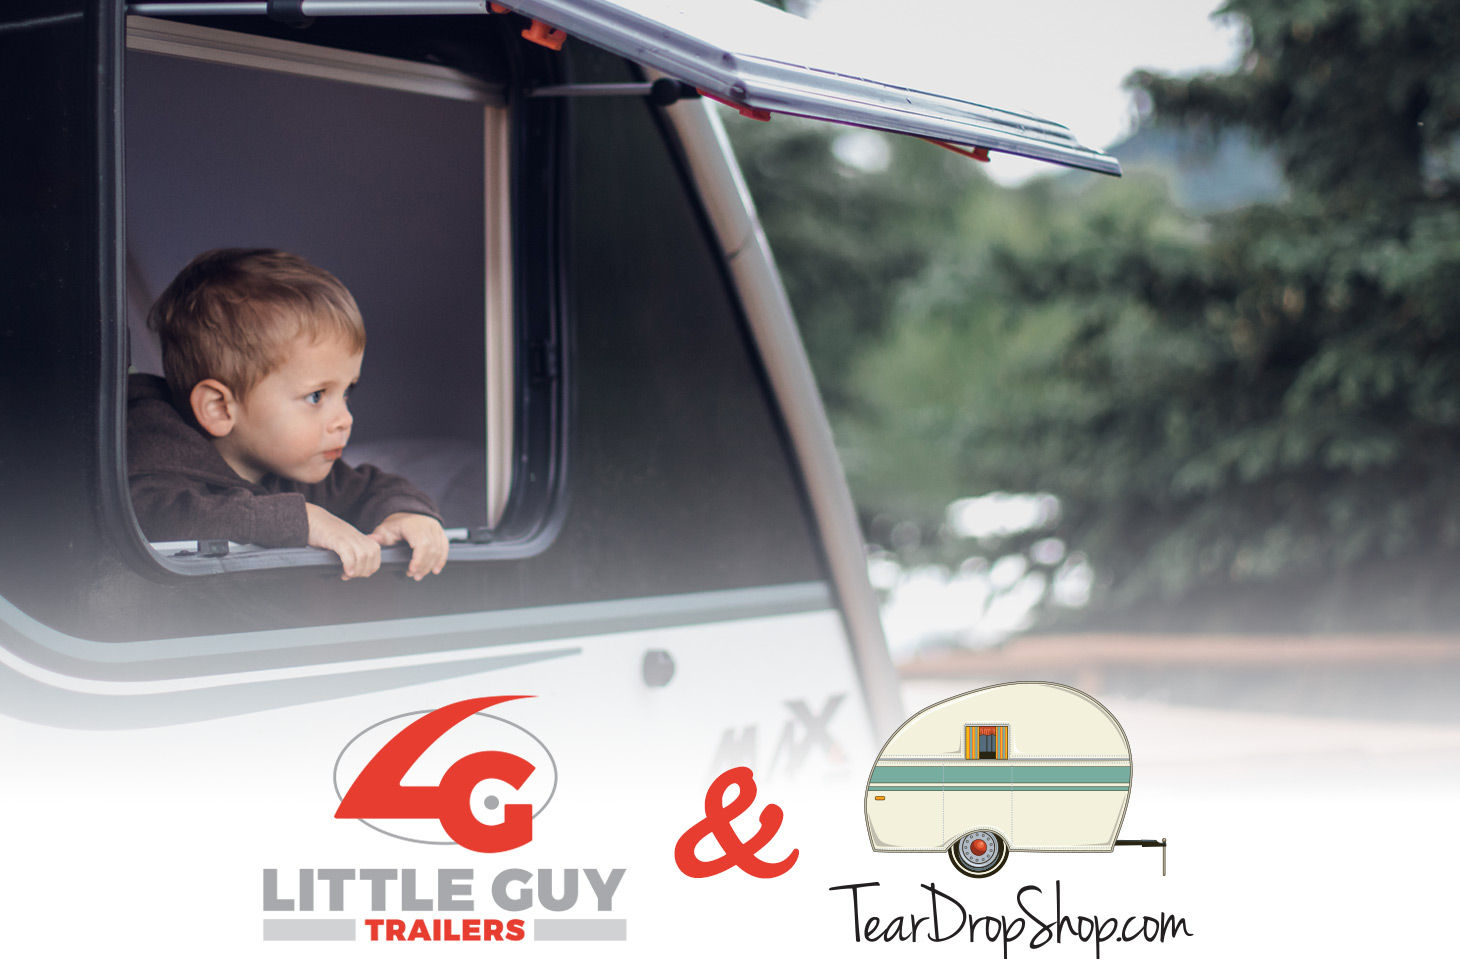 Little Guy and Teardrop Shop Photo Contest Giveaway